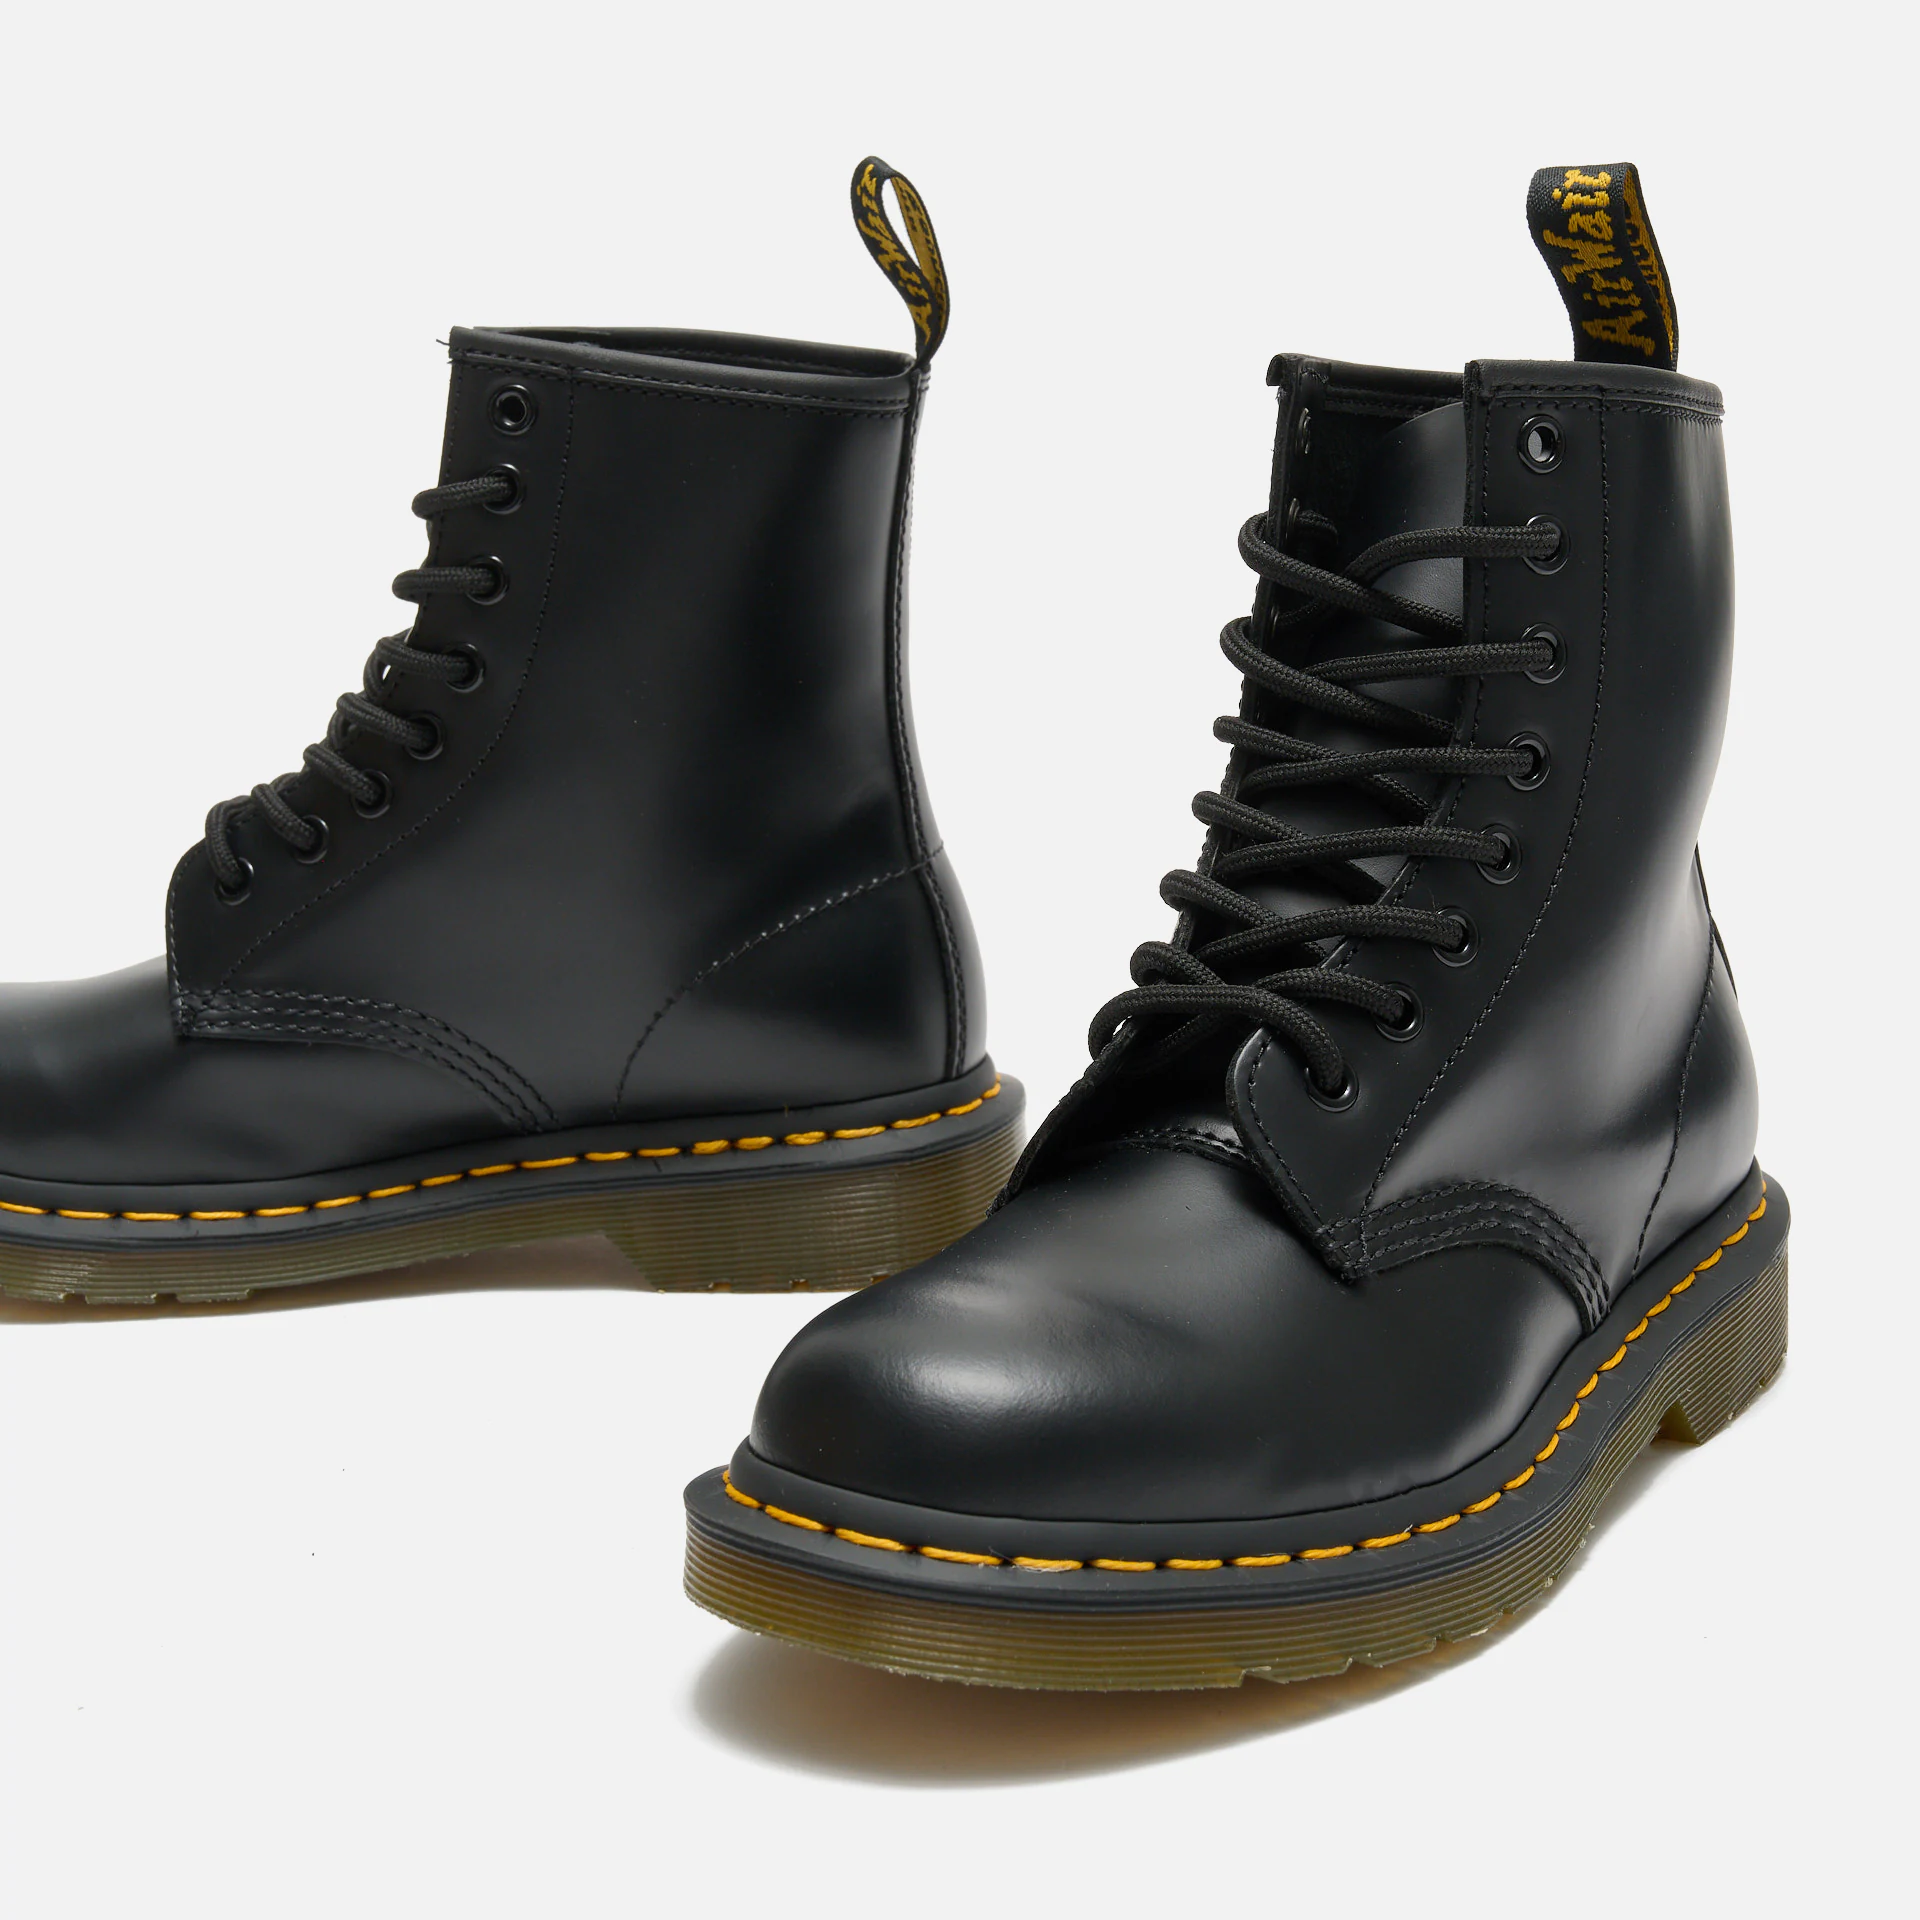 Dr. Martens Boots 1460 Black Smooth